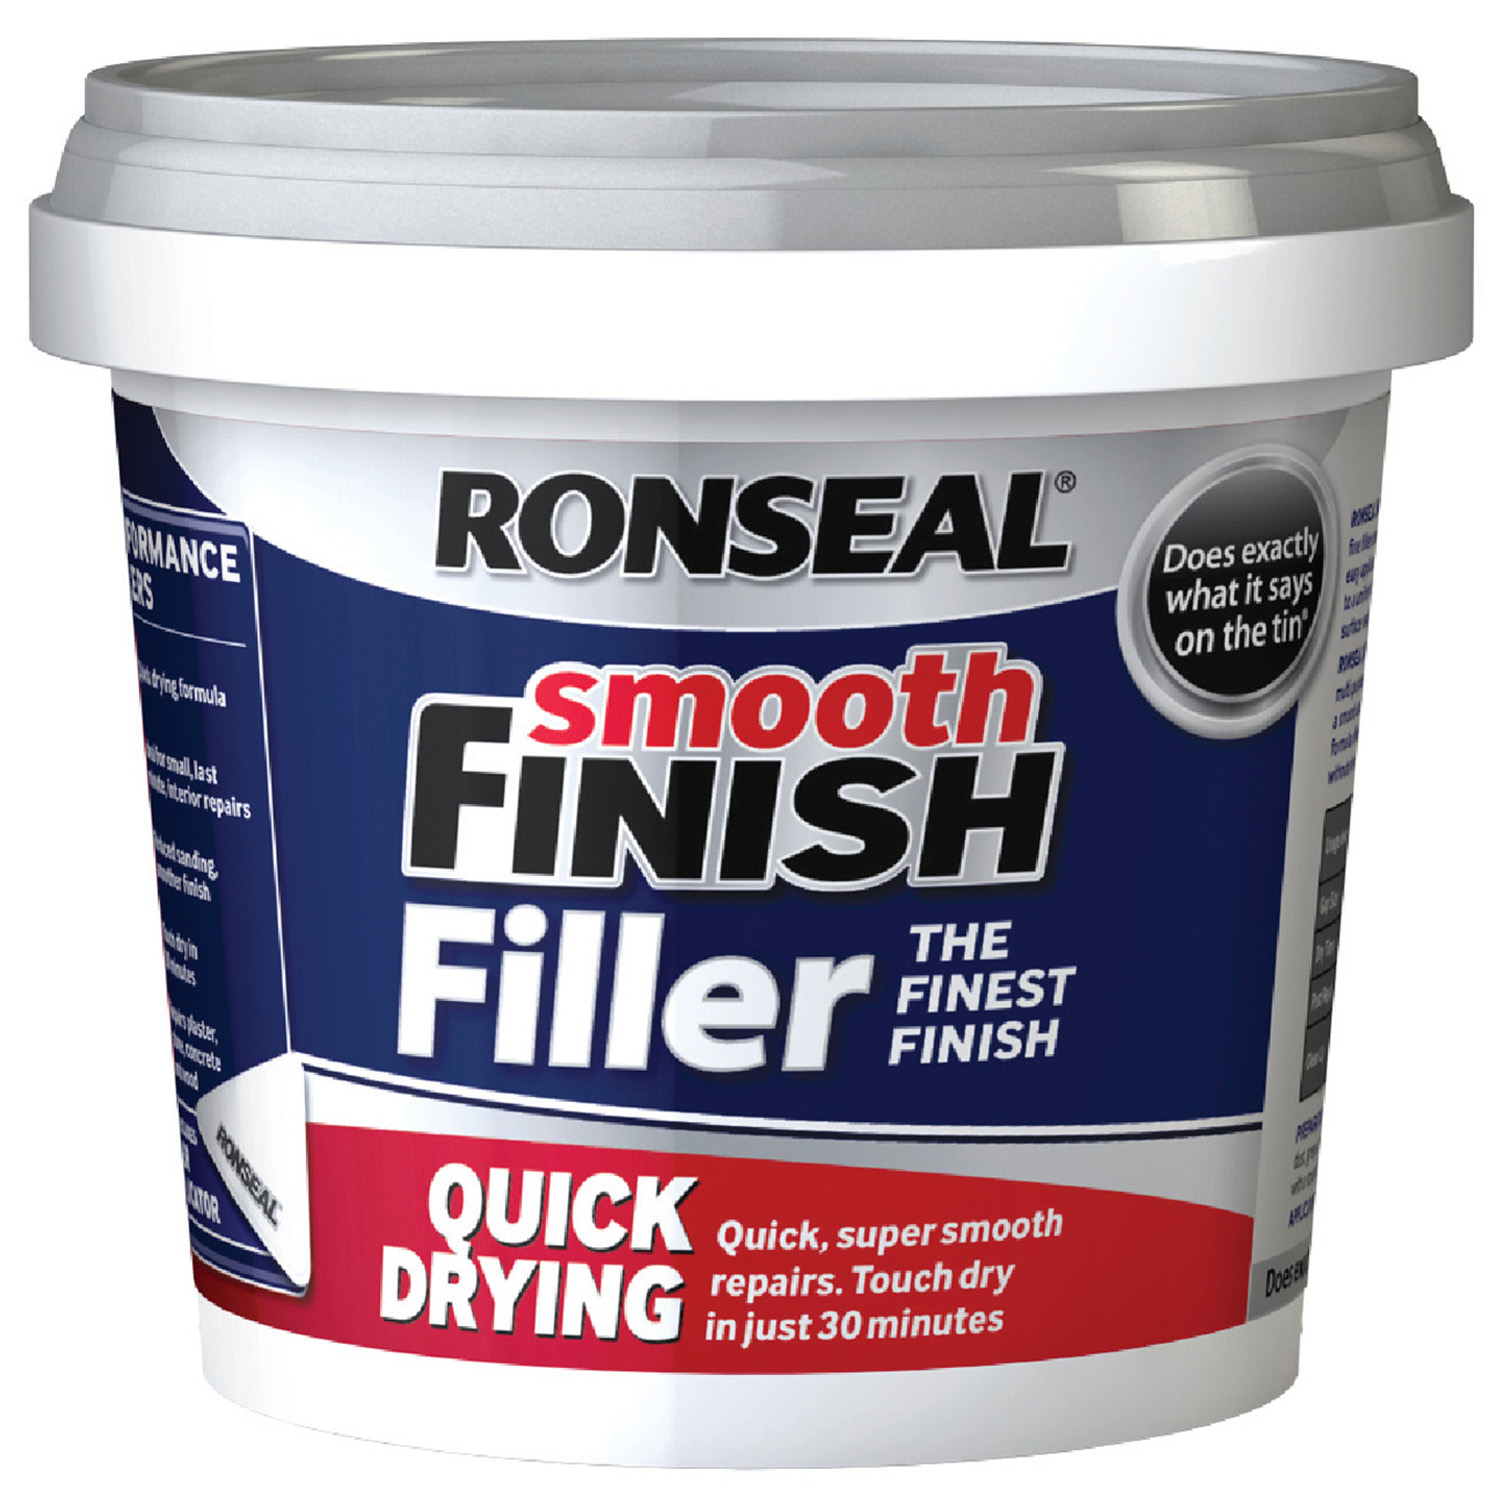 Ronseal Quick Drying Smooth Finish Filler Image